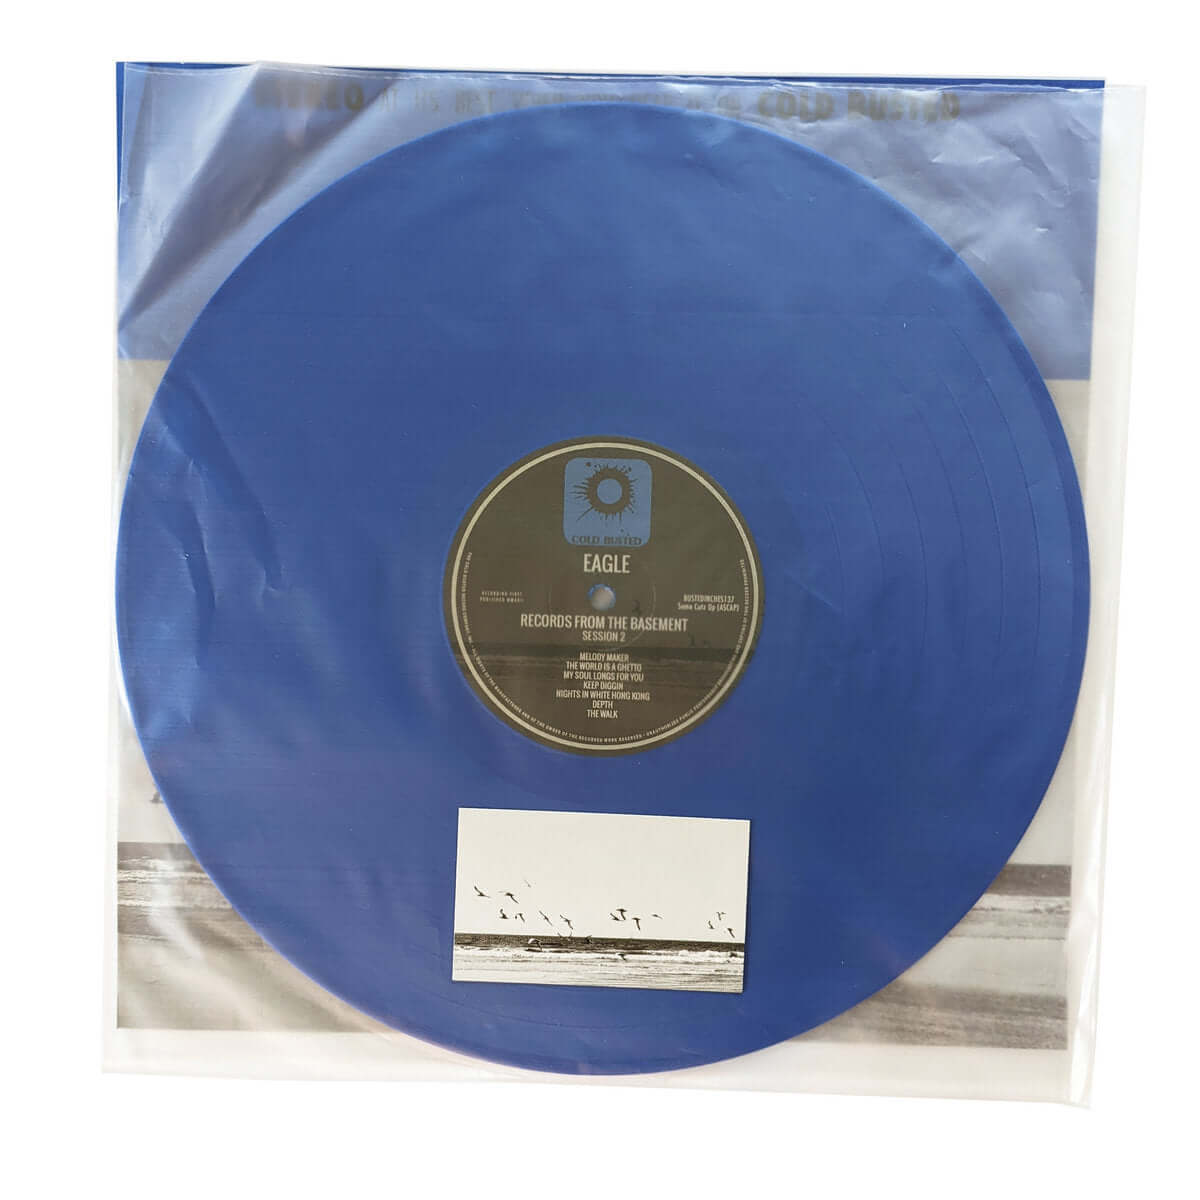 Eagle - Records From The Basement Session 2 - Limited Edition Solid Blue Colored 12 Inch Vinyl - Cold Busted